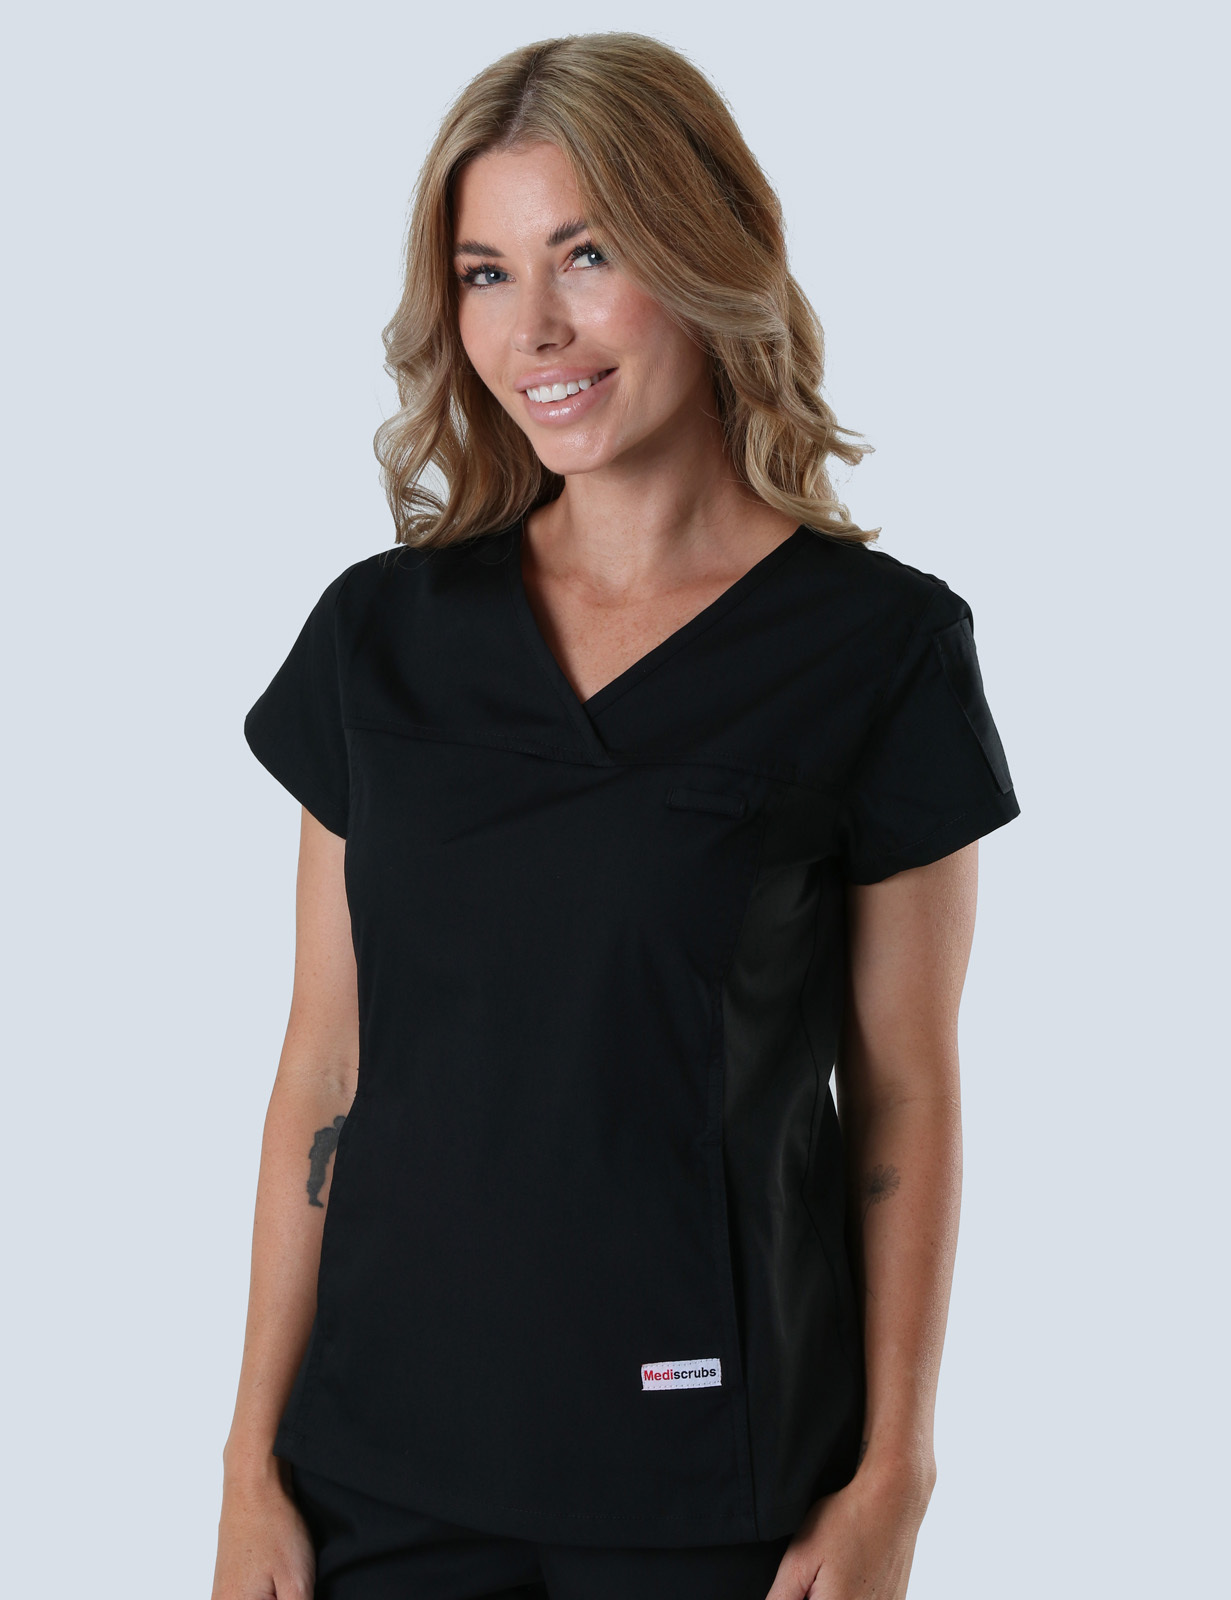 Women's Fit Solid Scrub Top With Spandex Panel - Black - 4X large